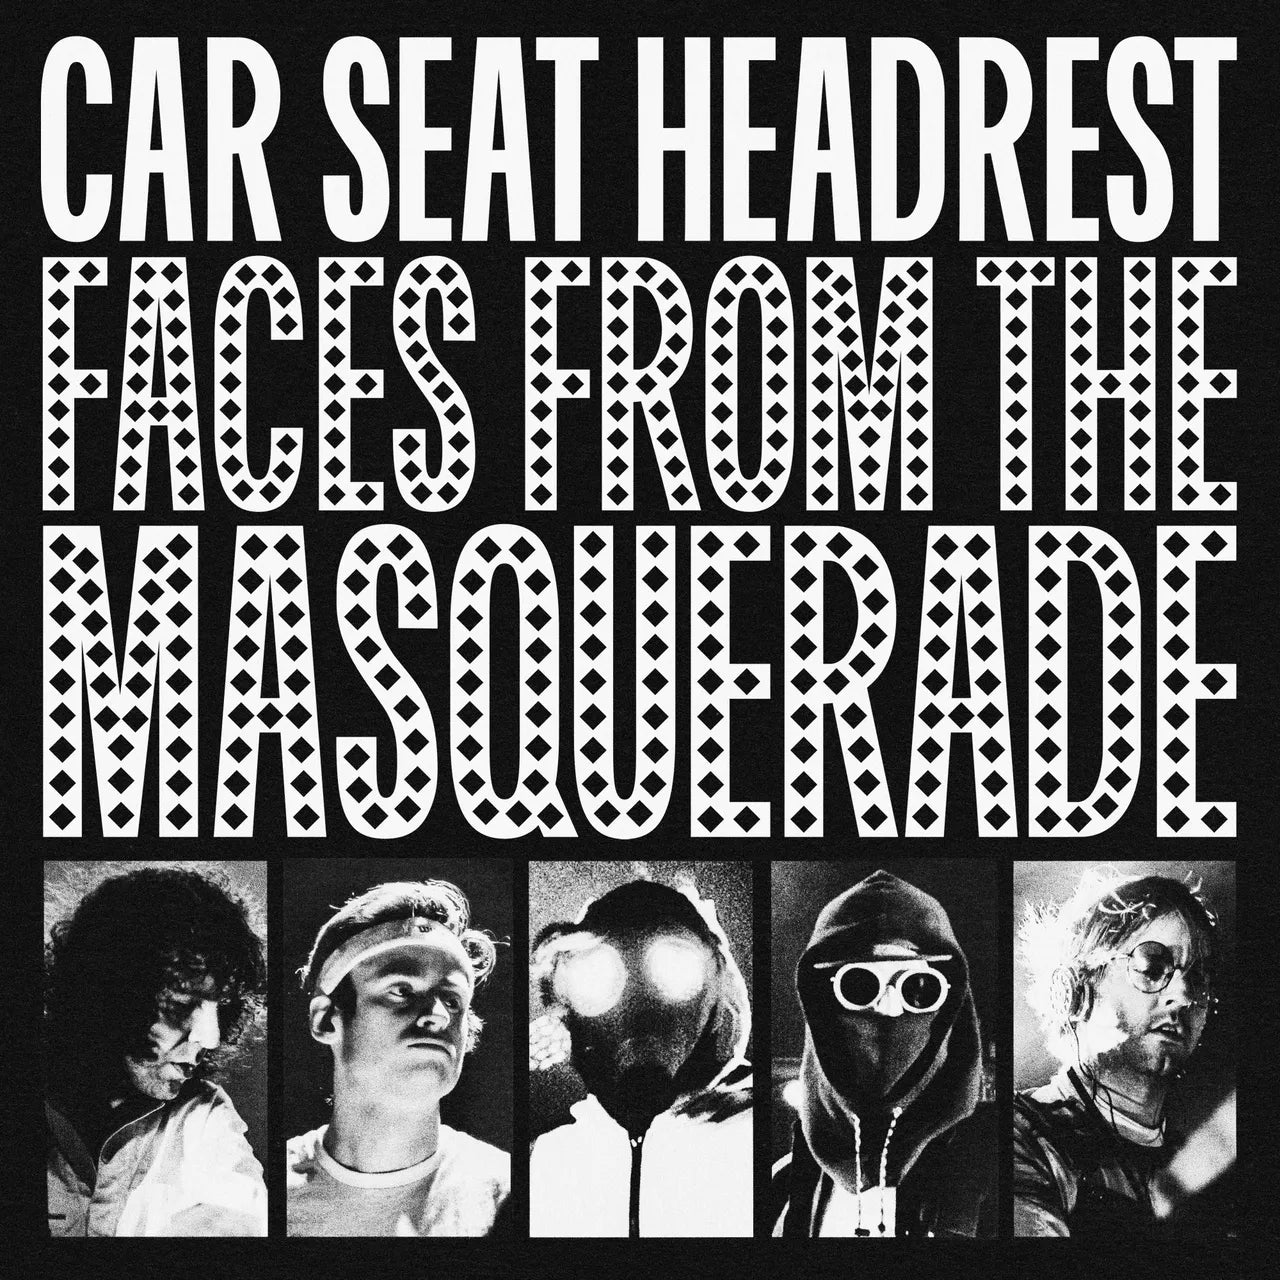 Car Seat Headrest - Faces From the Masquerade (2 LPs)